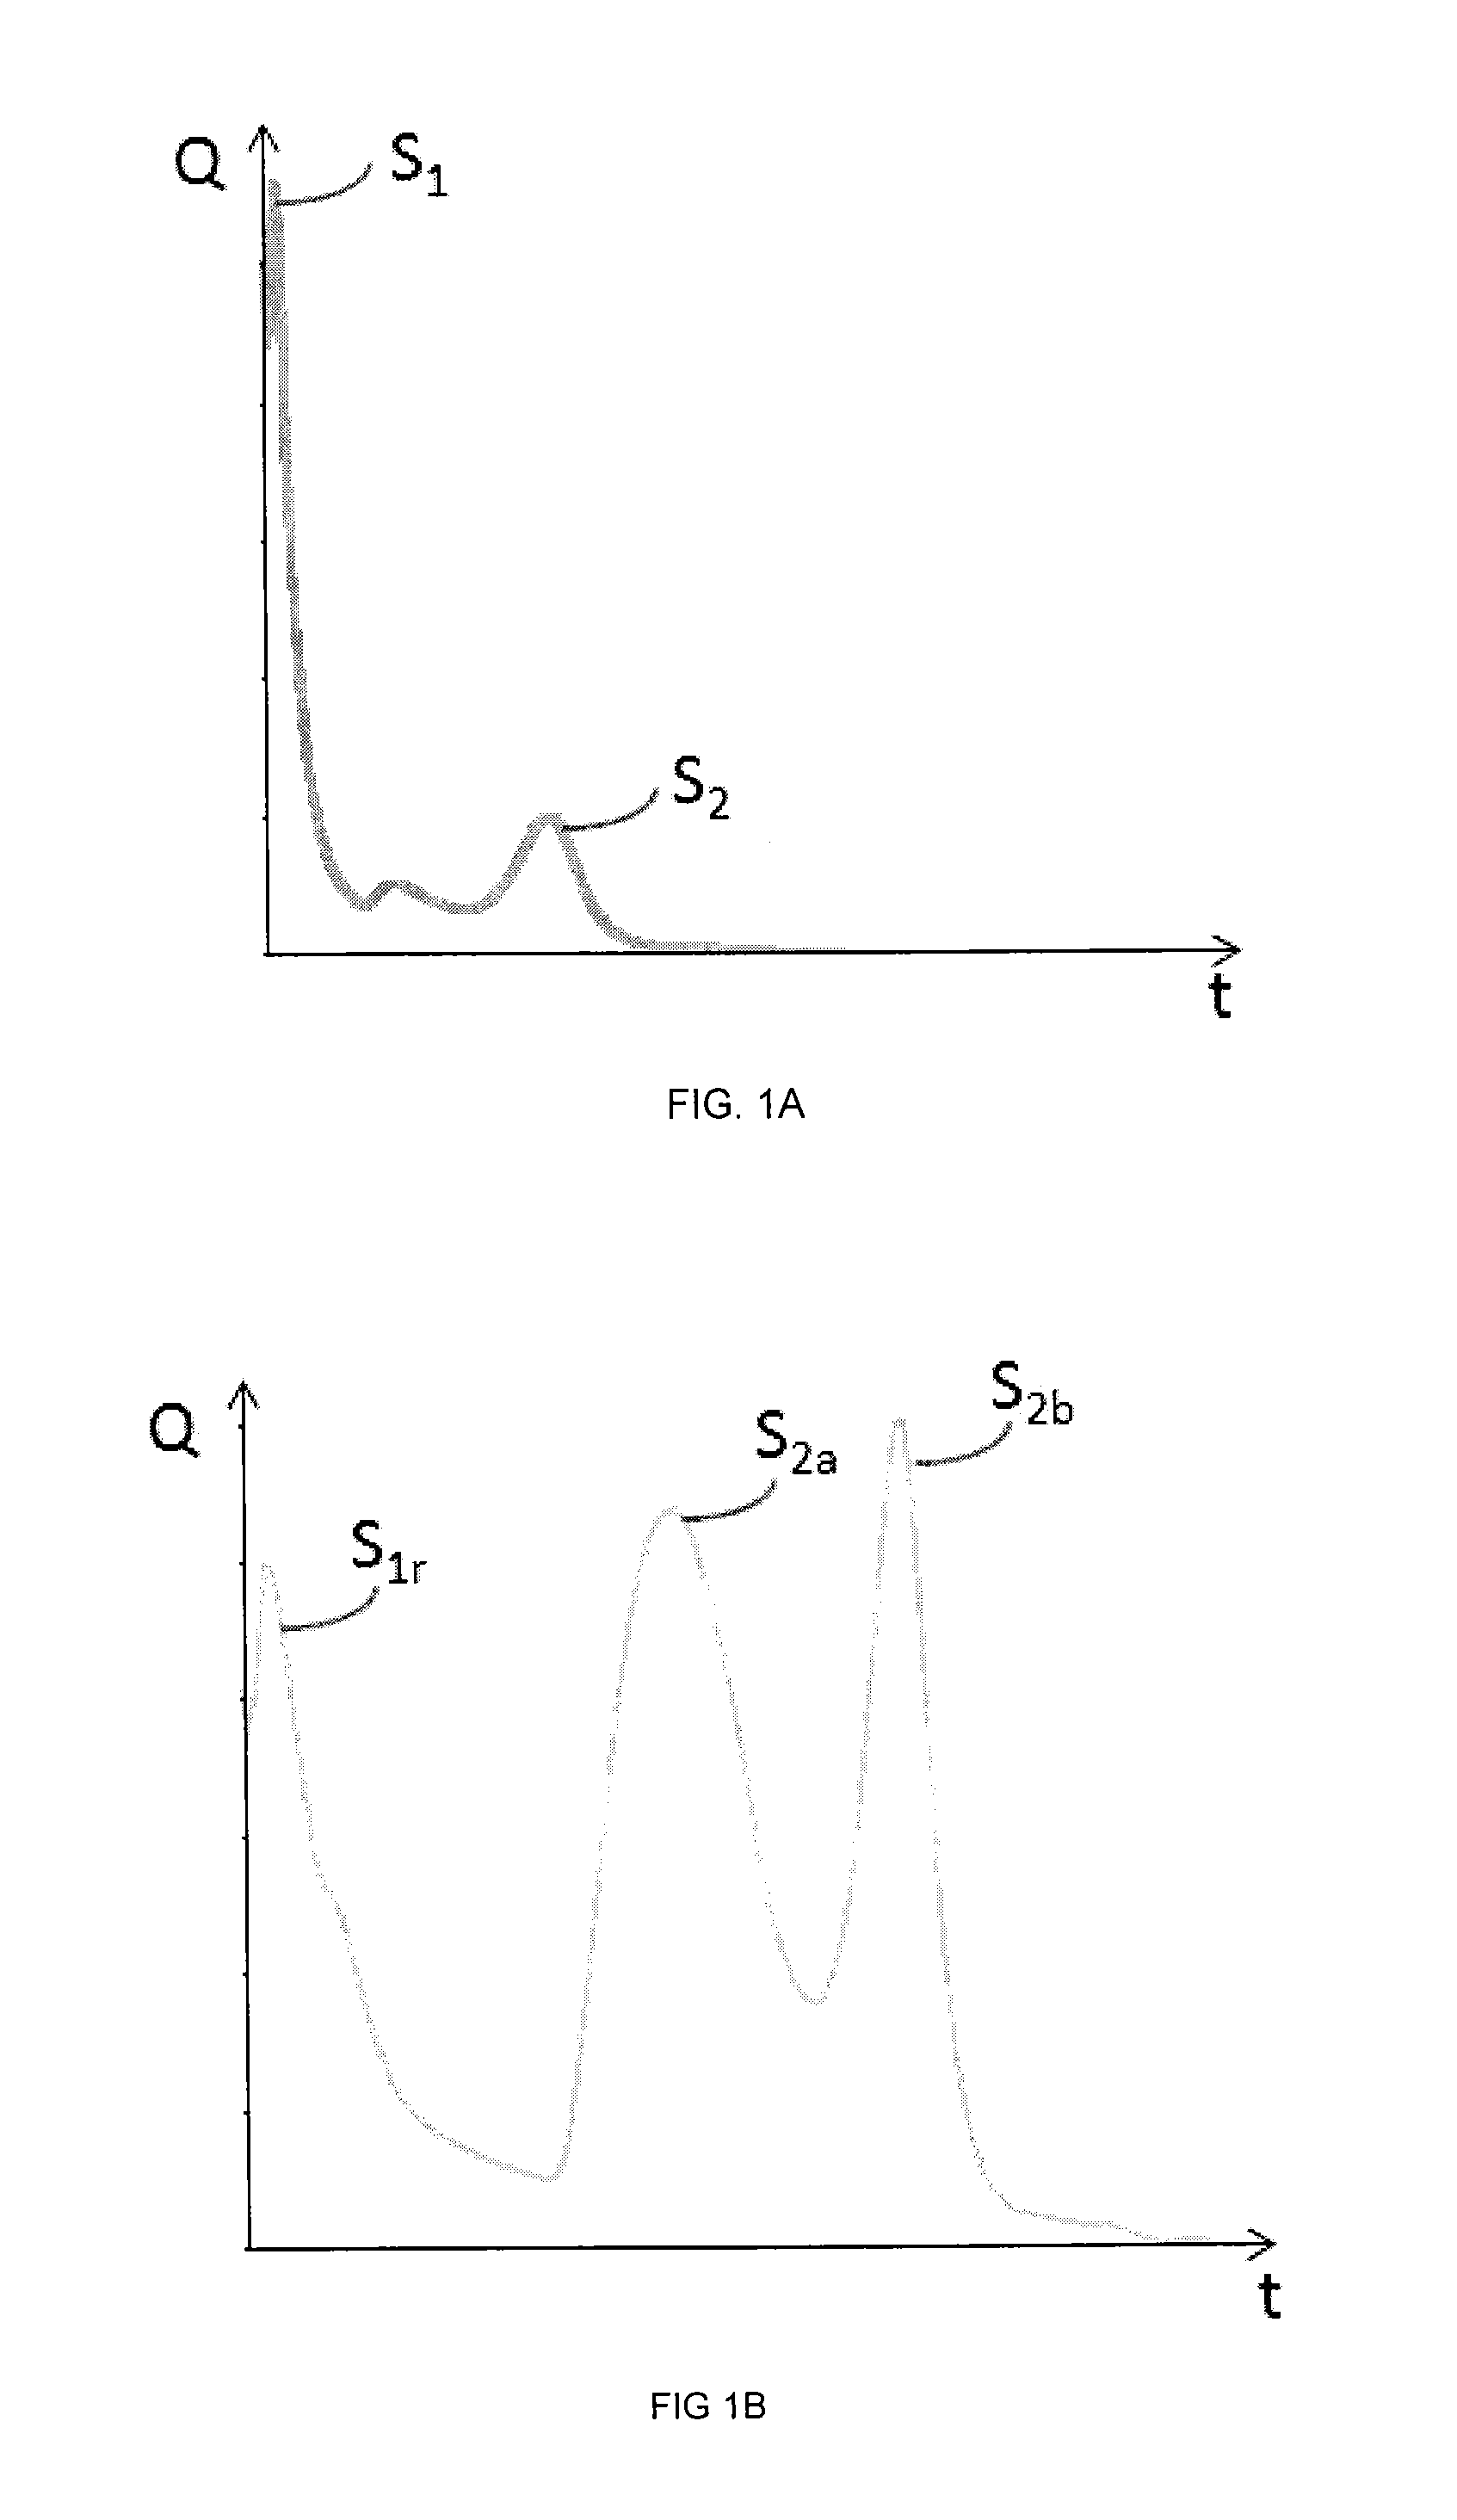 Method of assessing at least one petroleum characteristic of a rock sample